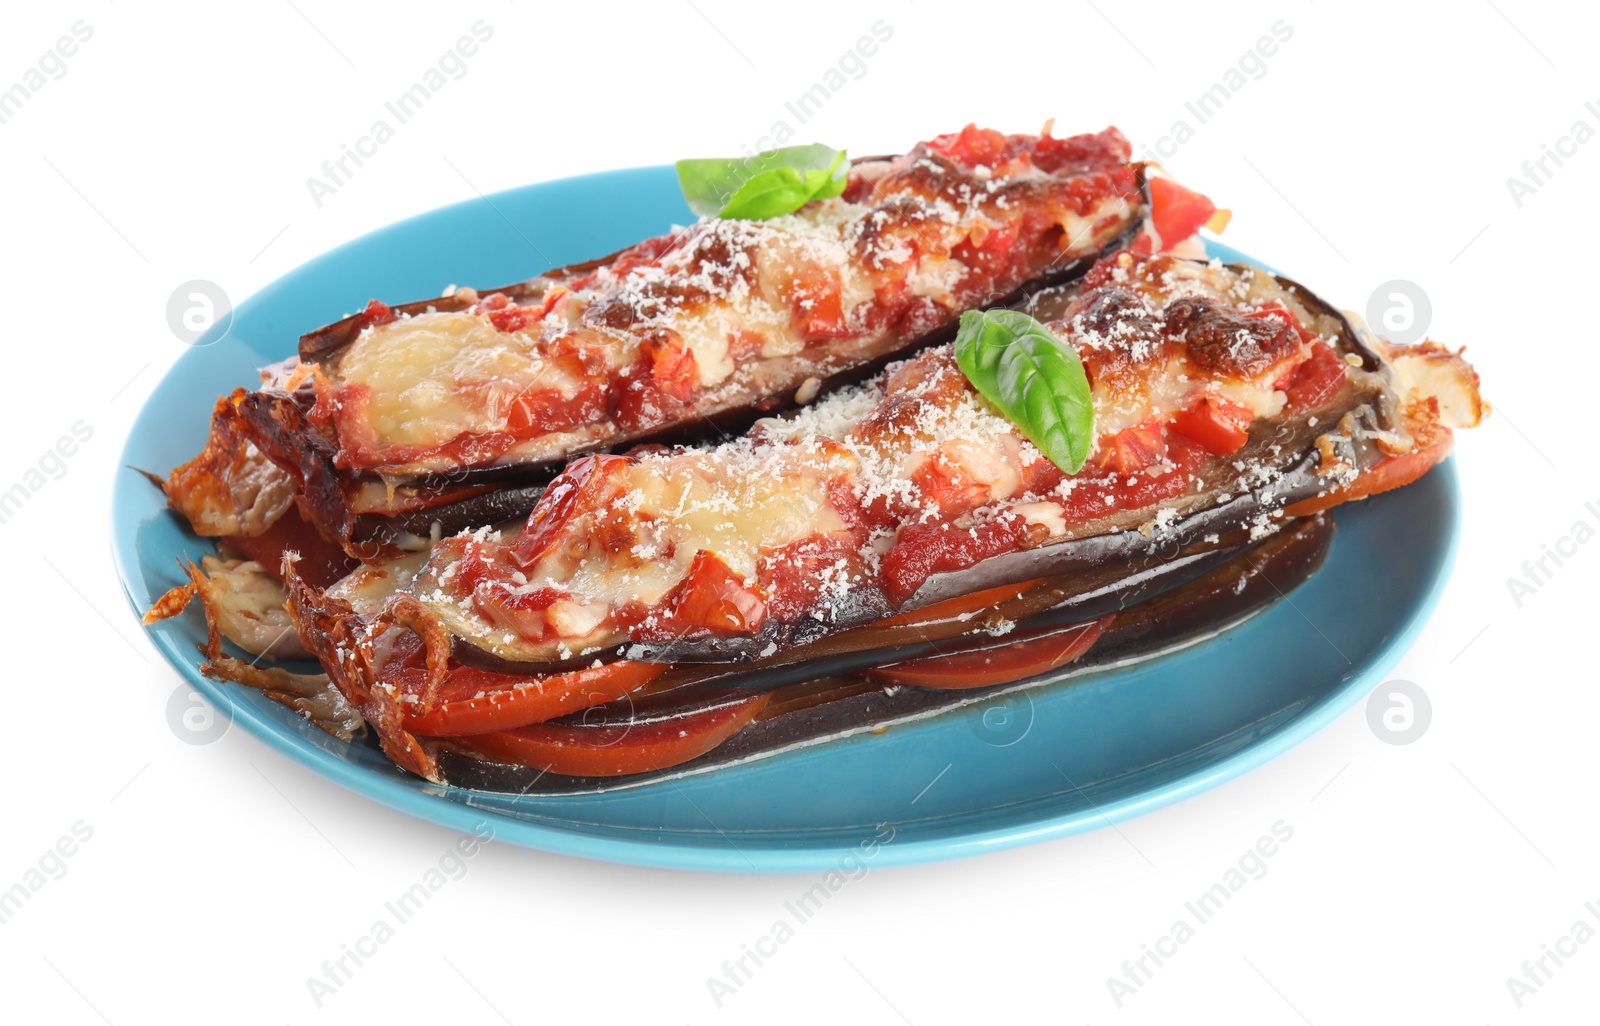 Photo of Baked eggplant with tomatoes, cheese and basil in plate isolated on white